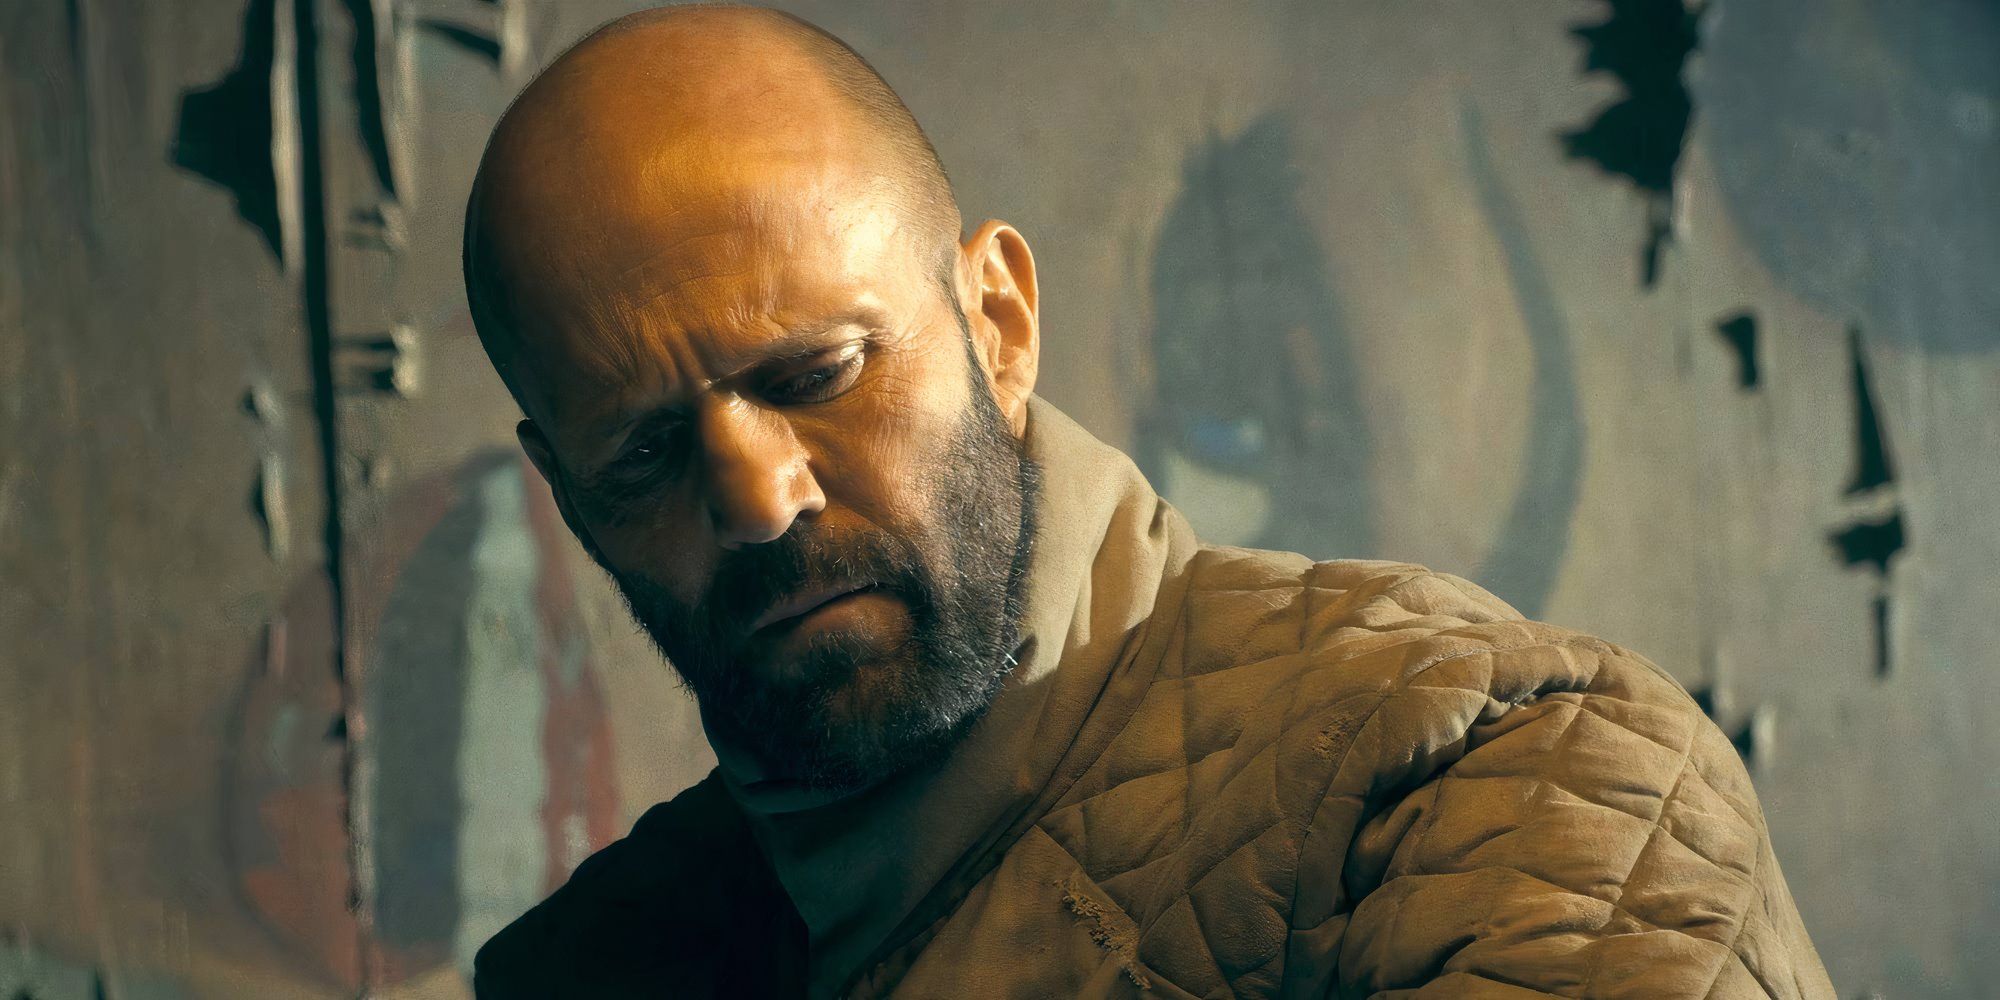 Jason Statham as Adam Clay in The Beekeeper looking confused.